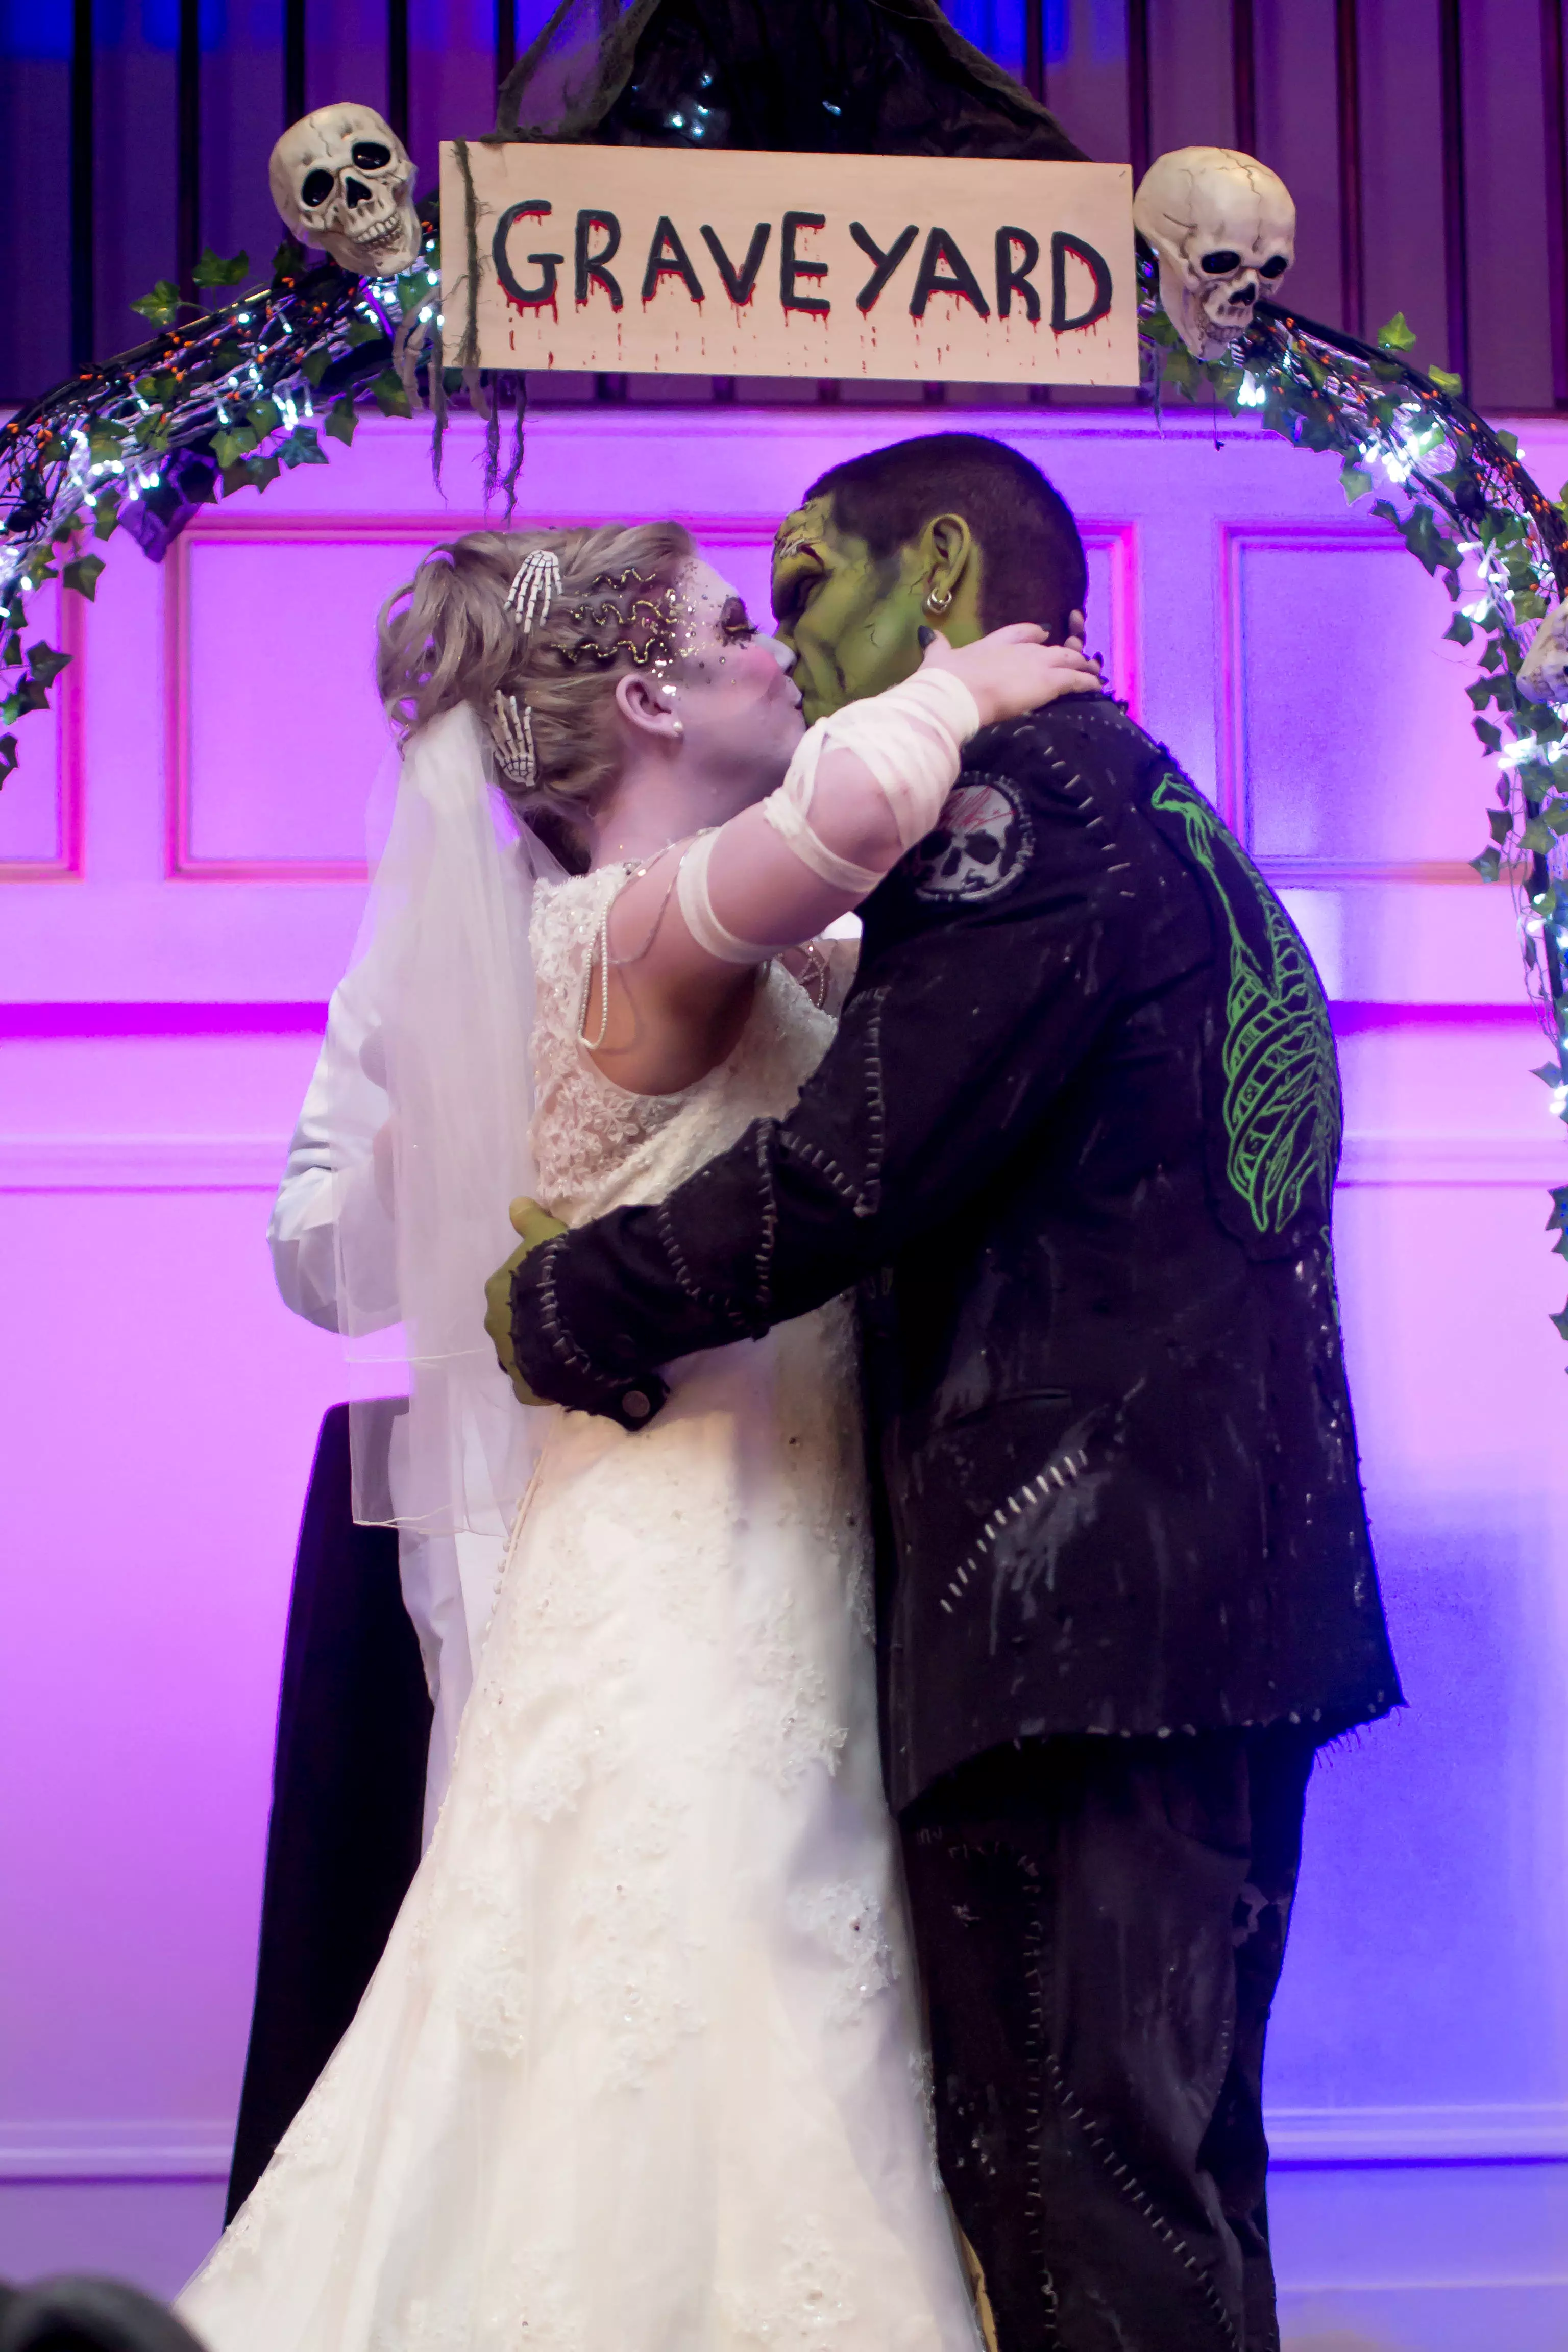 The couple said their vows in front of a ghoulish graveyard backdrop. (